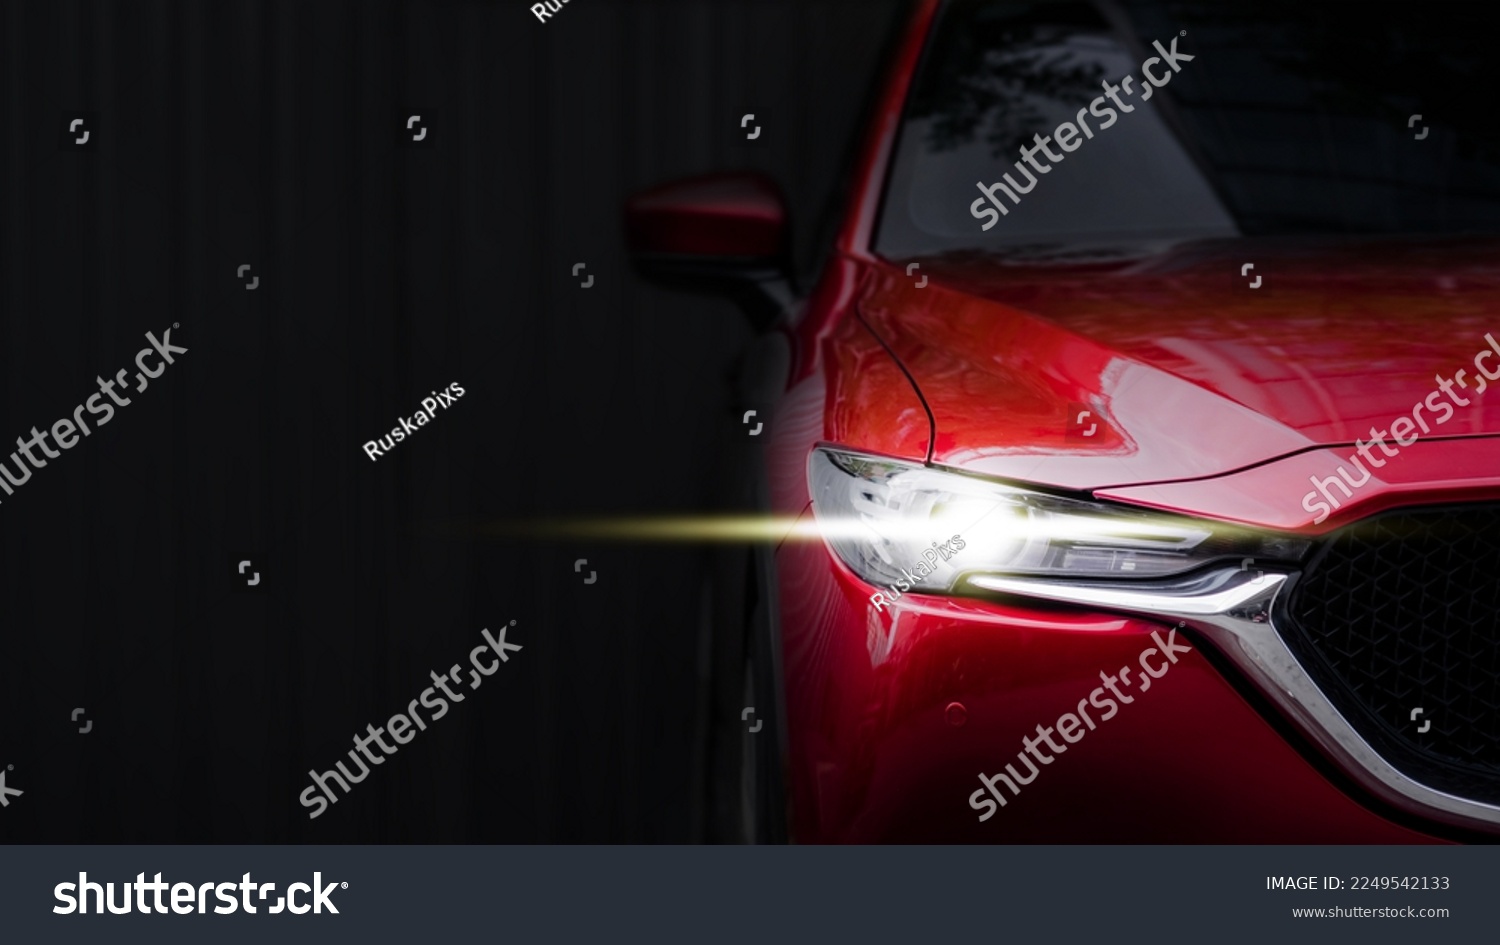 close up headlight of red car against black background. #2249542133